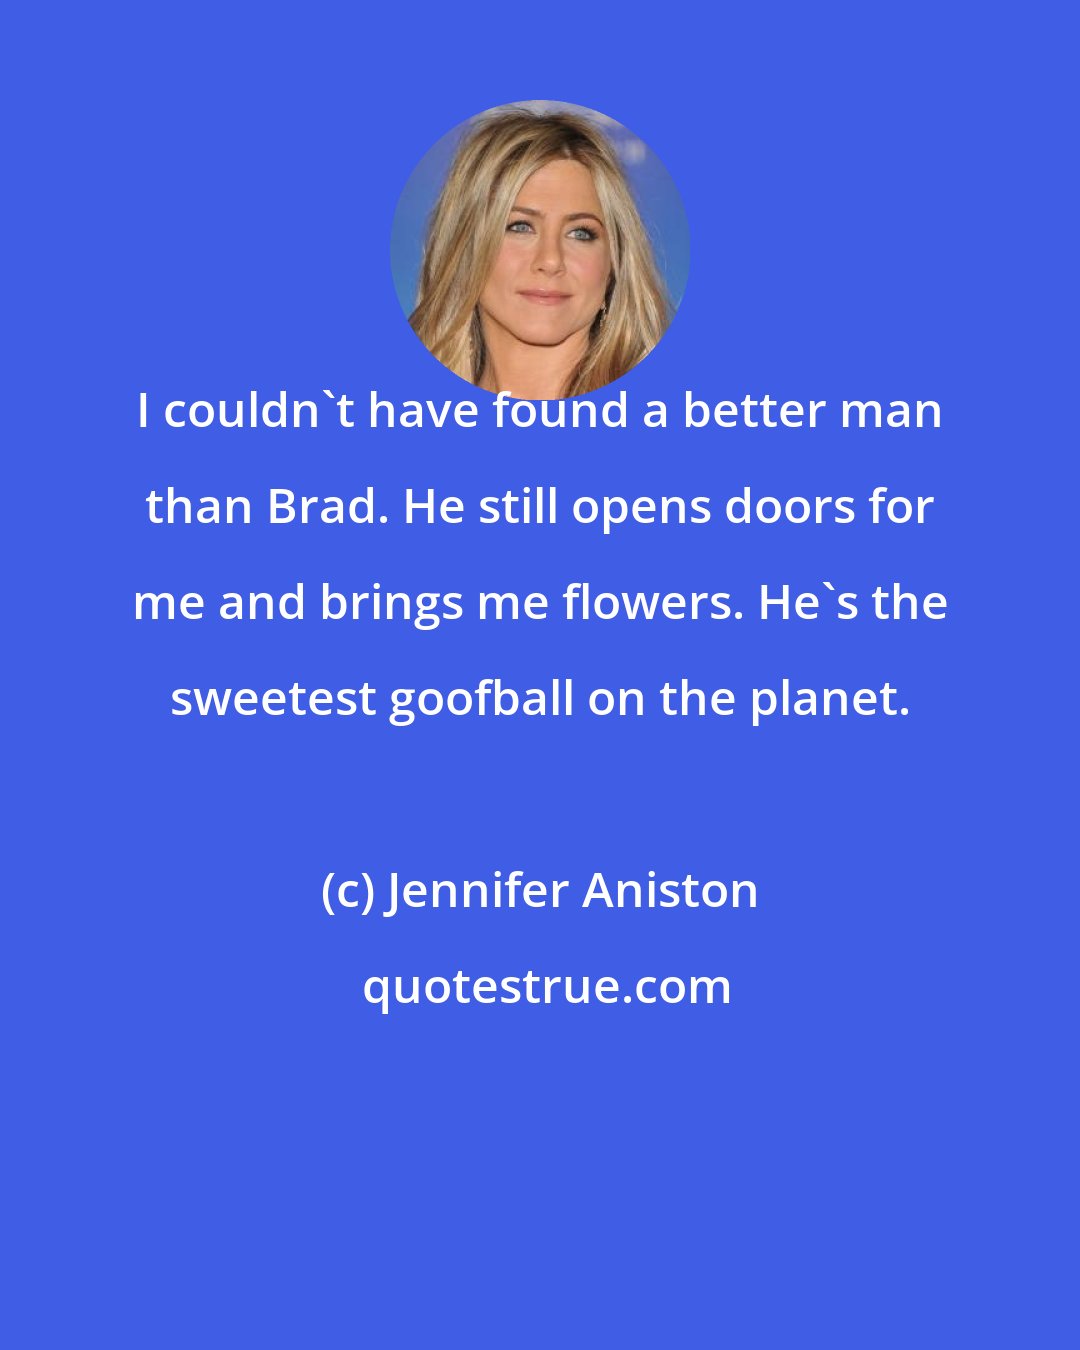 Jennifer Aniston: I couldn't have found a better man than Brad. He still opens doors for me and brings me flowers. He's the sweetest goofball on the planet.